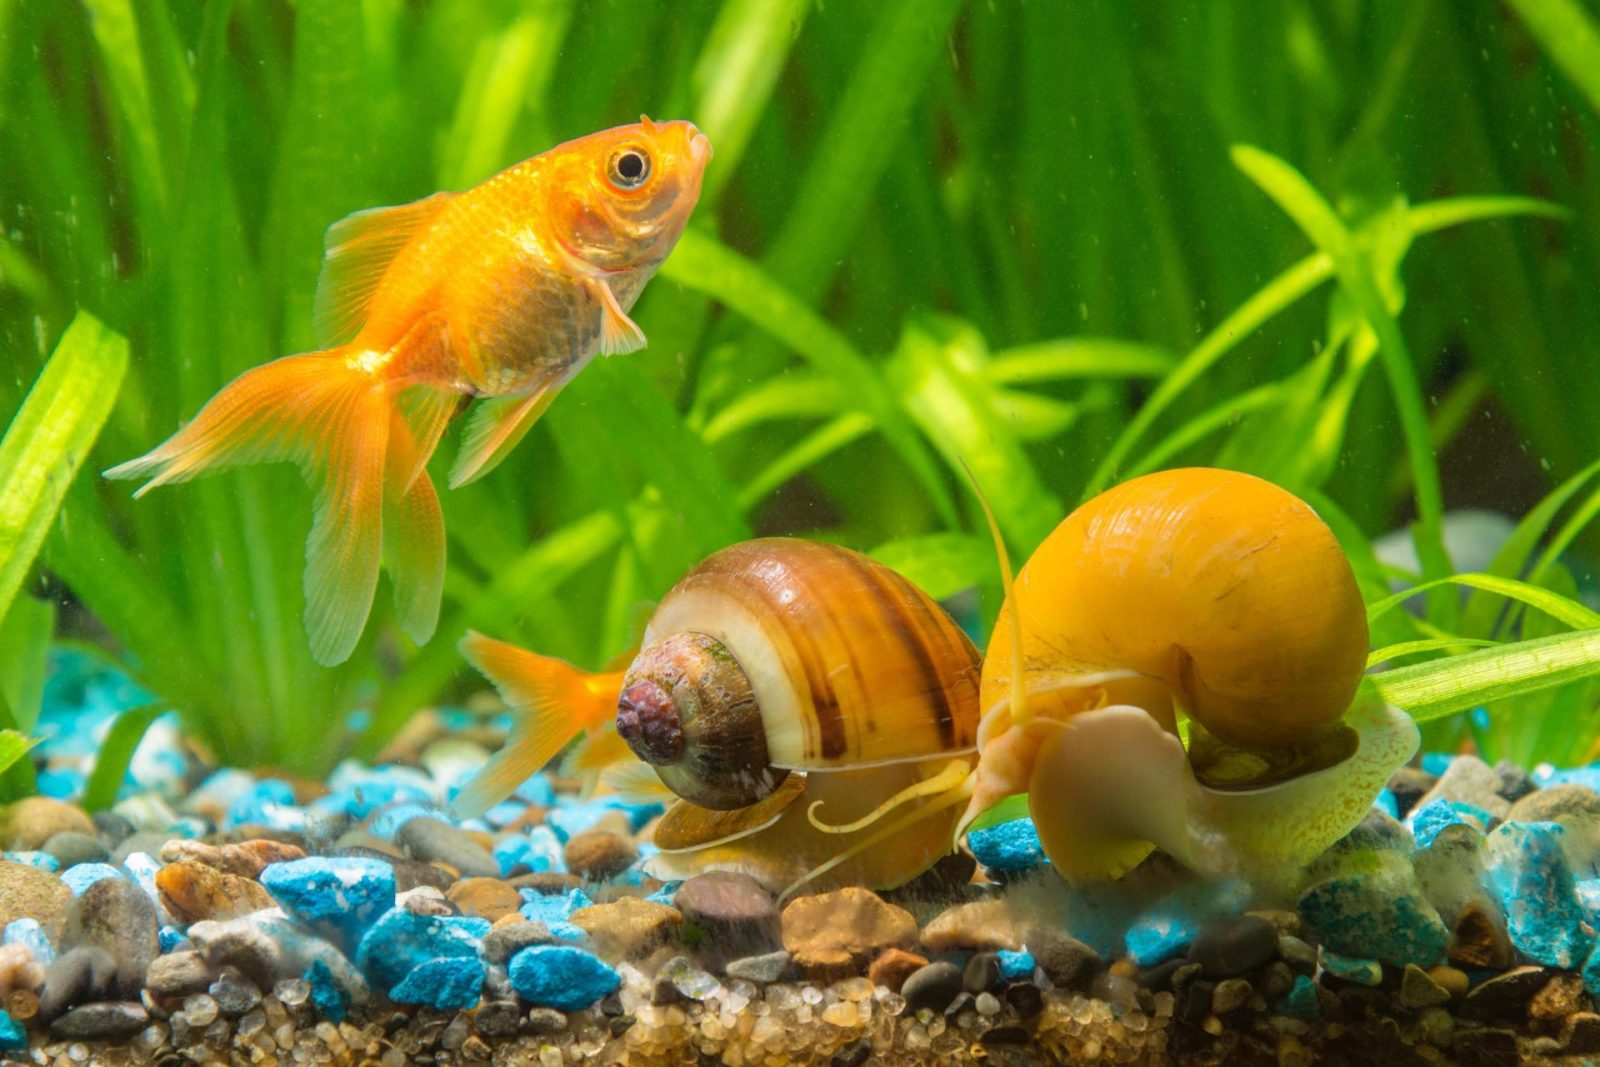 Can You Match These Animals With Their Natural Food Source? Aquarium Snails